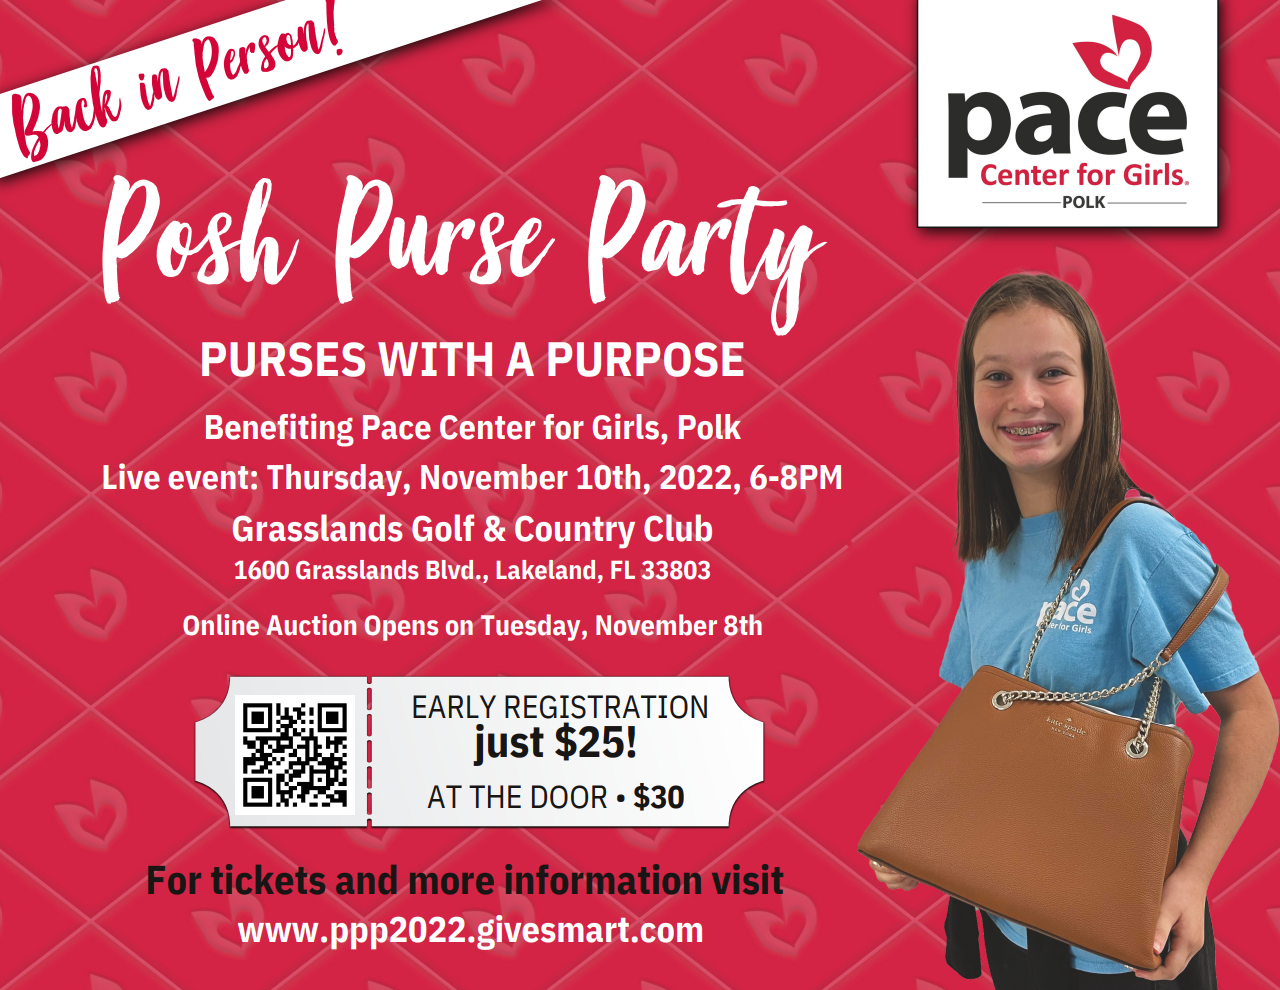 posh purse party, in person!  purses with a purpose, benefits pace center for girls.  11-10-22 6-8pm, 1600 grasslands blvd.  online auction opens on 11-8.  early reg just $25.  at the door, $30.  tix and info: ppp2022.givesmart.com